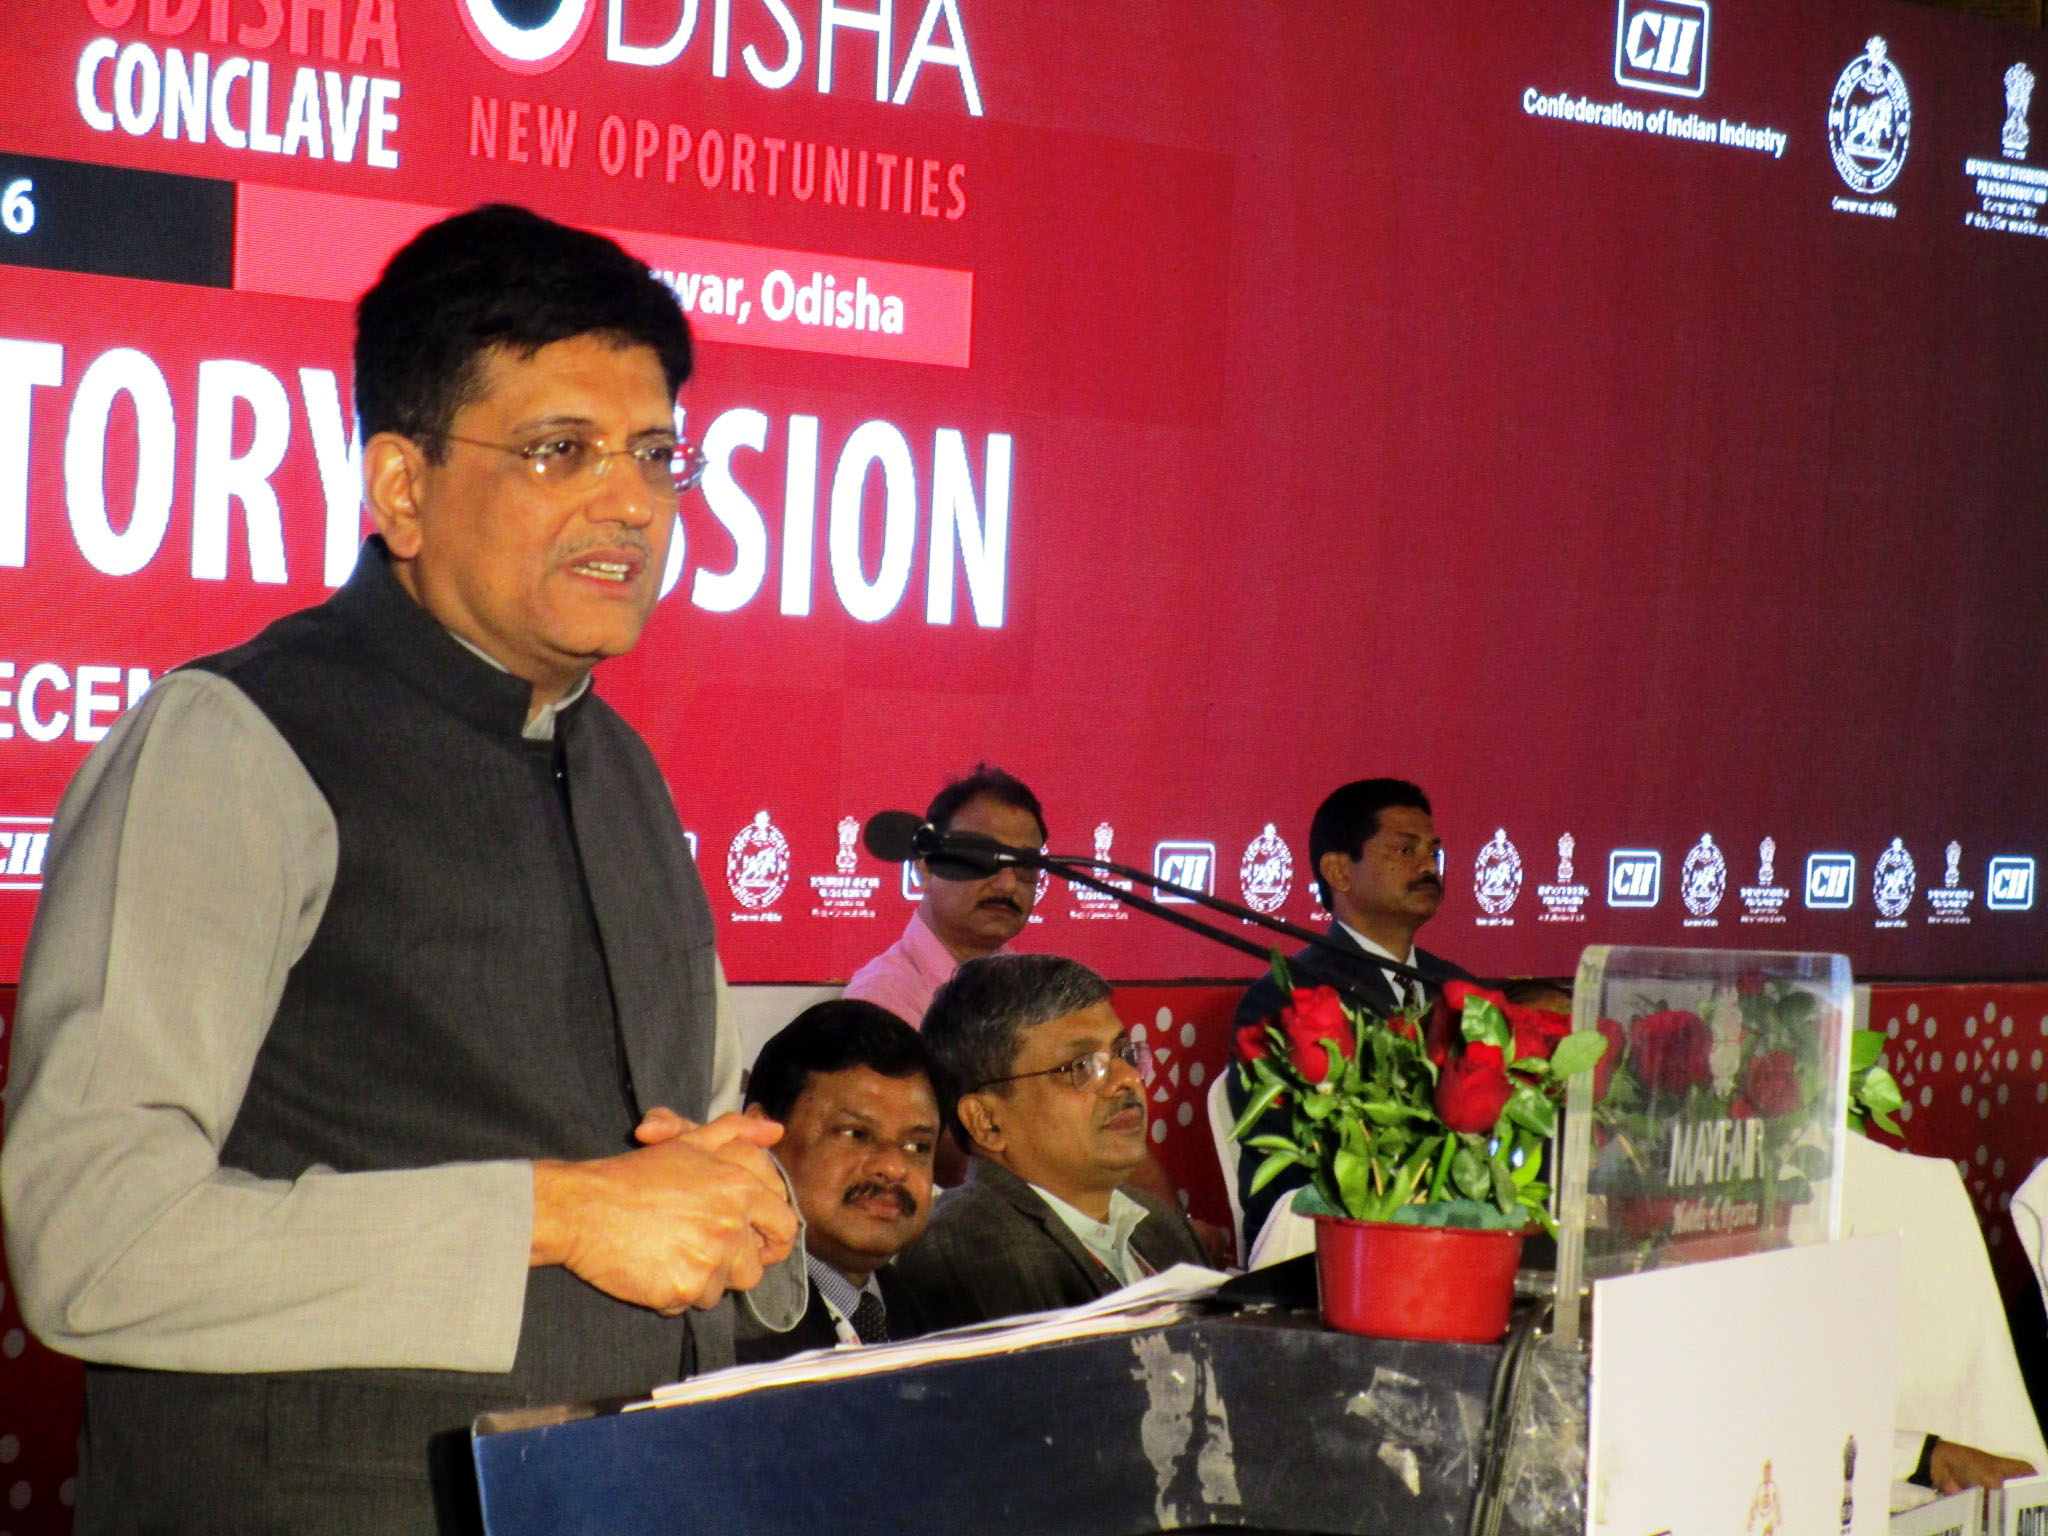 The Minister of State for Power, Coal, New and Renewable Energy and Mines (Independent Charge), Shri Piyush Goyal addressing at the valedictory function of the Make in Odisha Conclave, at Bhubaneswar, Odisha on December 02, 2016.